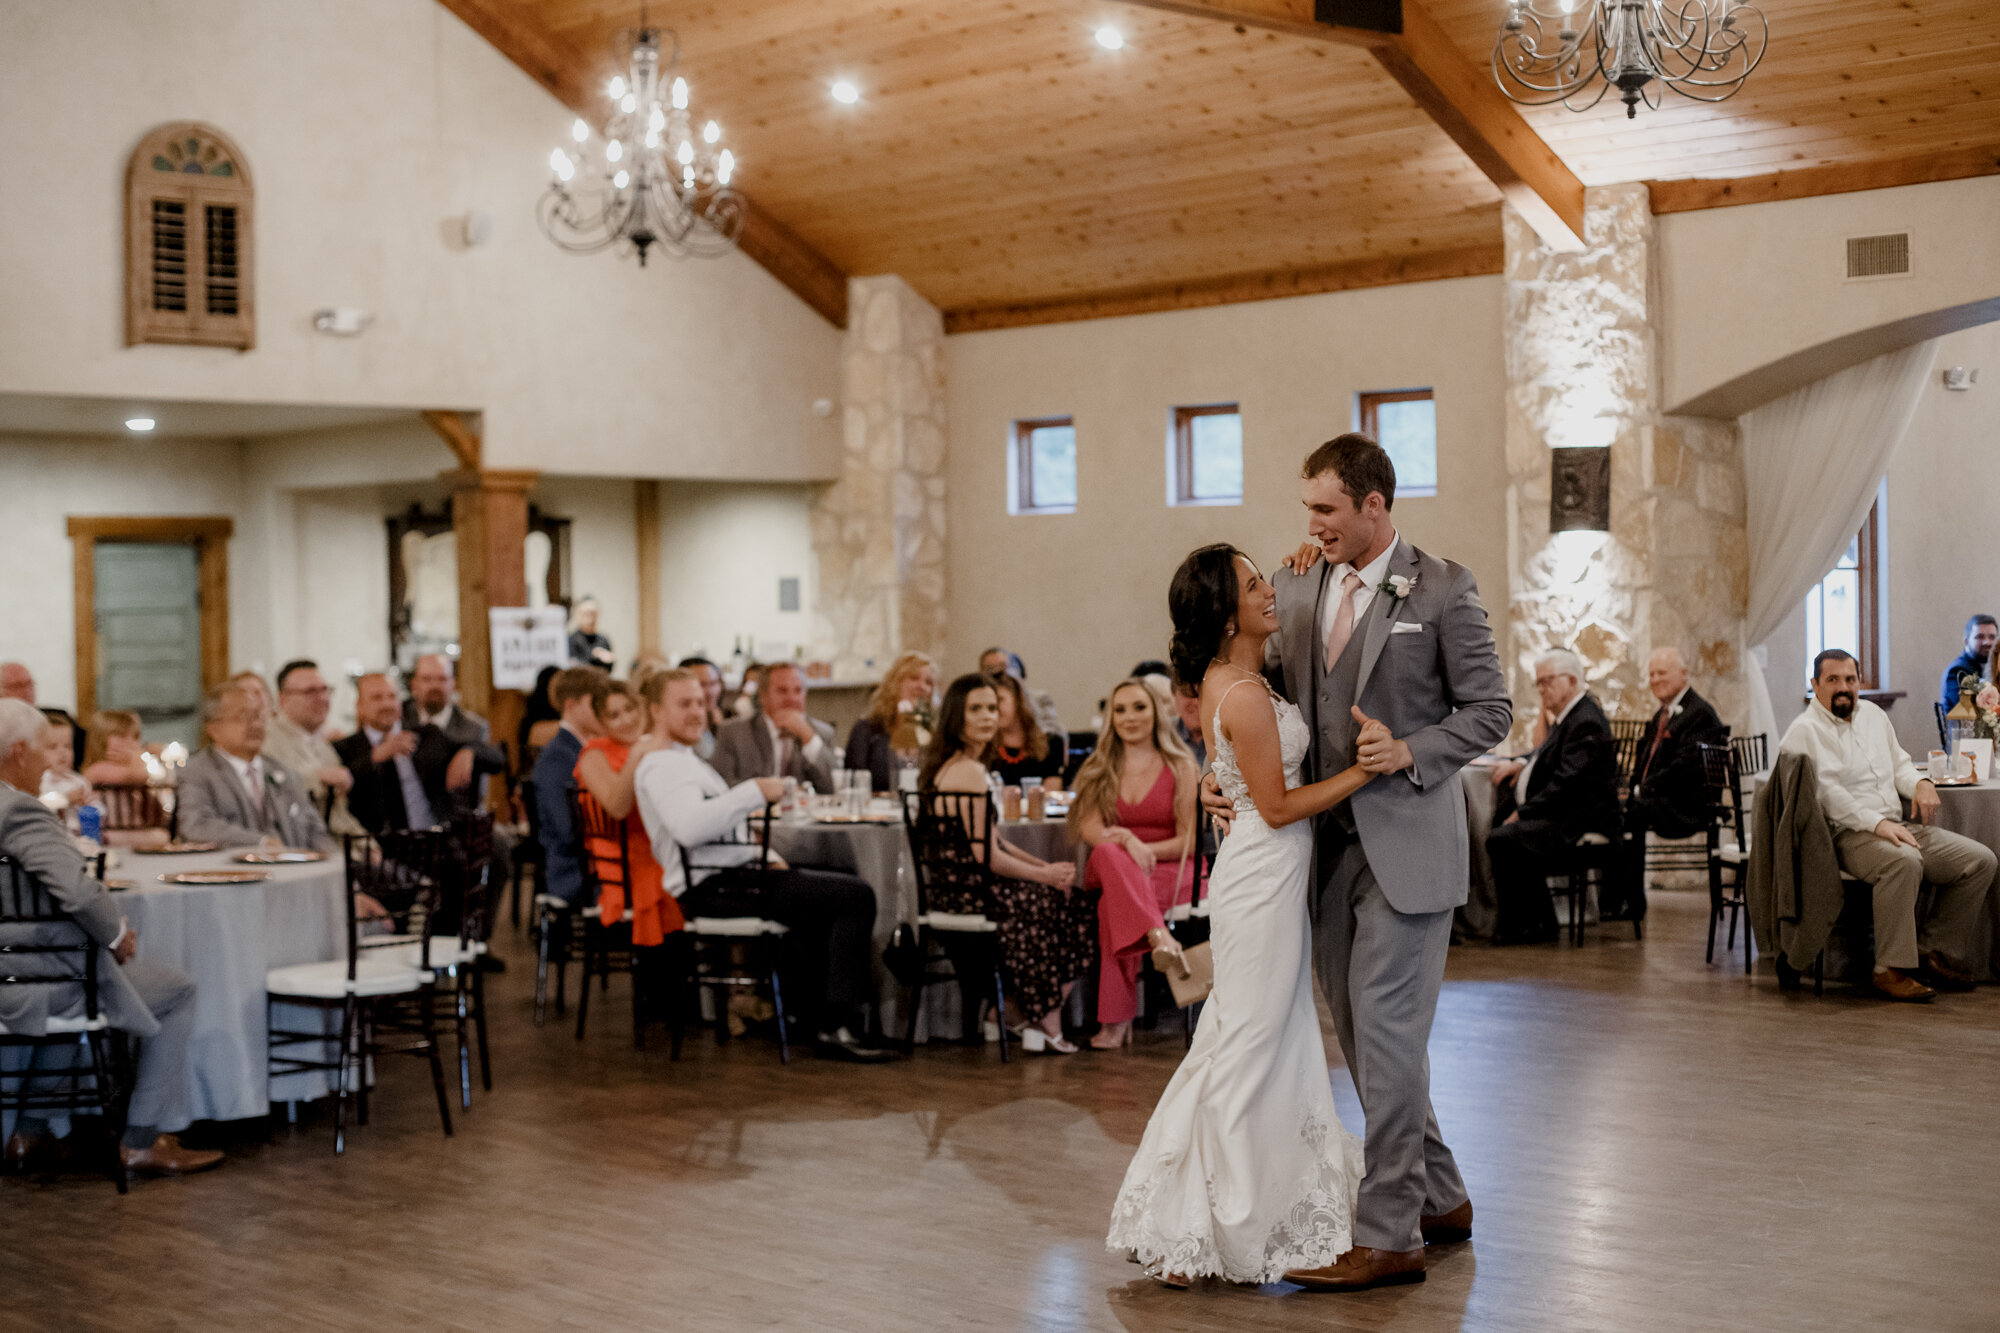 Bride and groom first dance. Romantic Chic Country Wedding at Rustic Luxury Balmorhea Events&nbsp;Venue in Magnolia, TX